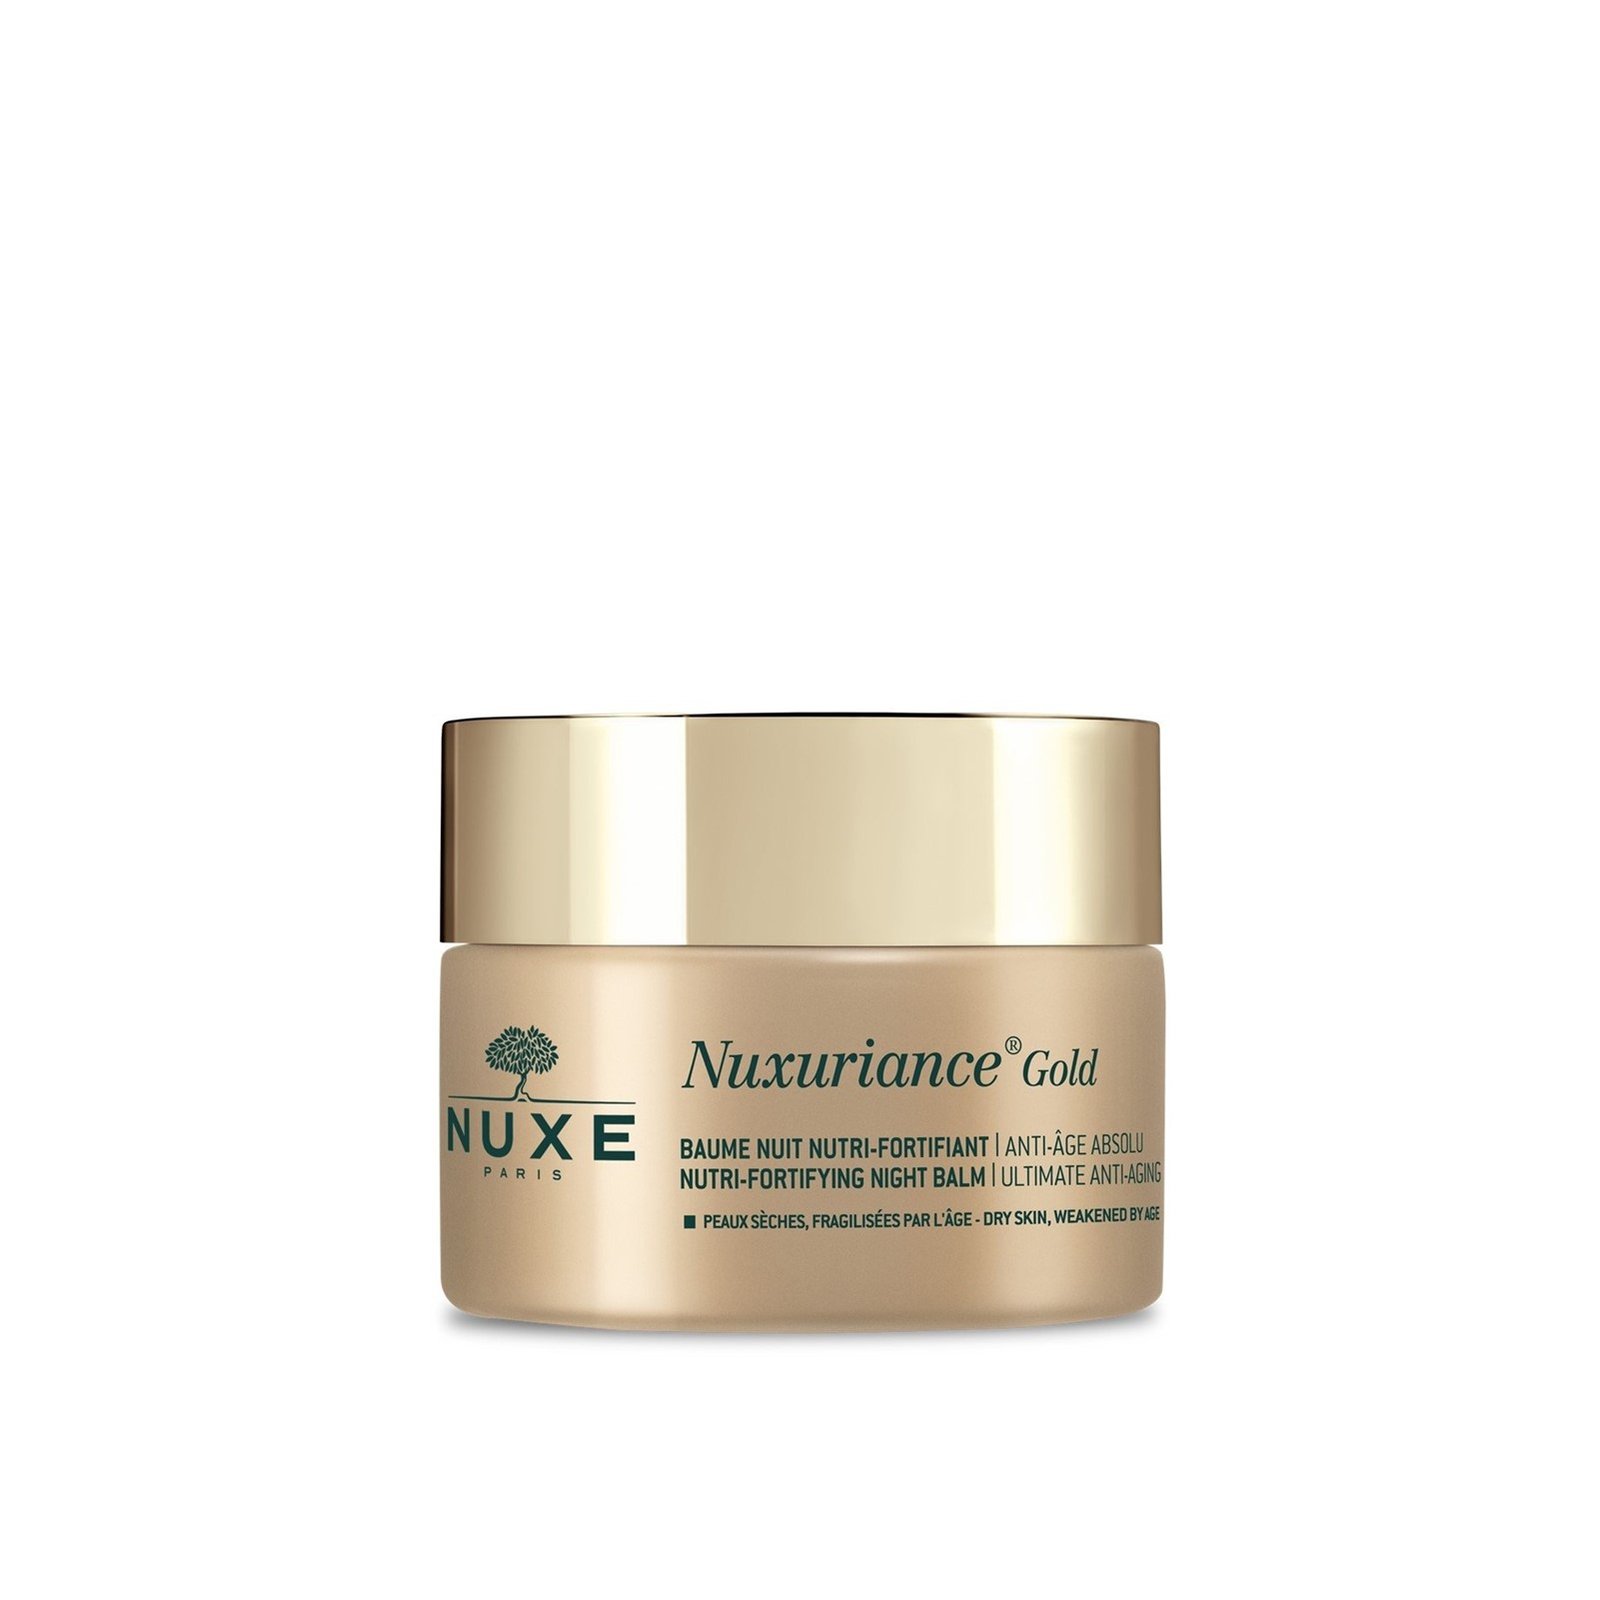 NUXE Nuxuriance Gold Nutri-Fortifying Night Balm 50ml (1.69fl oz)